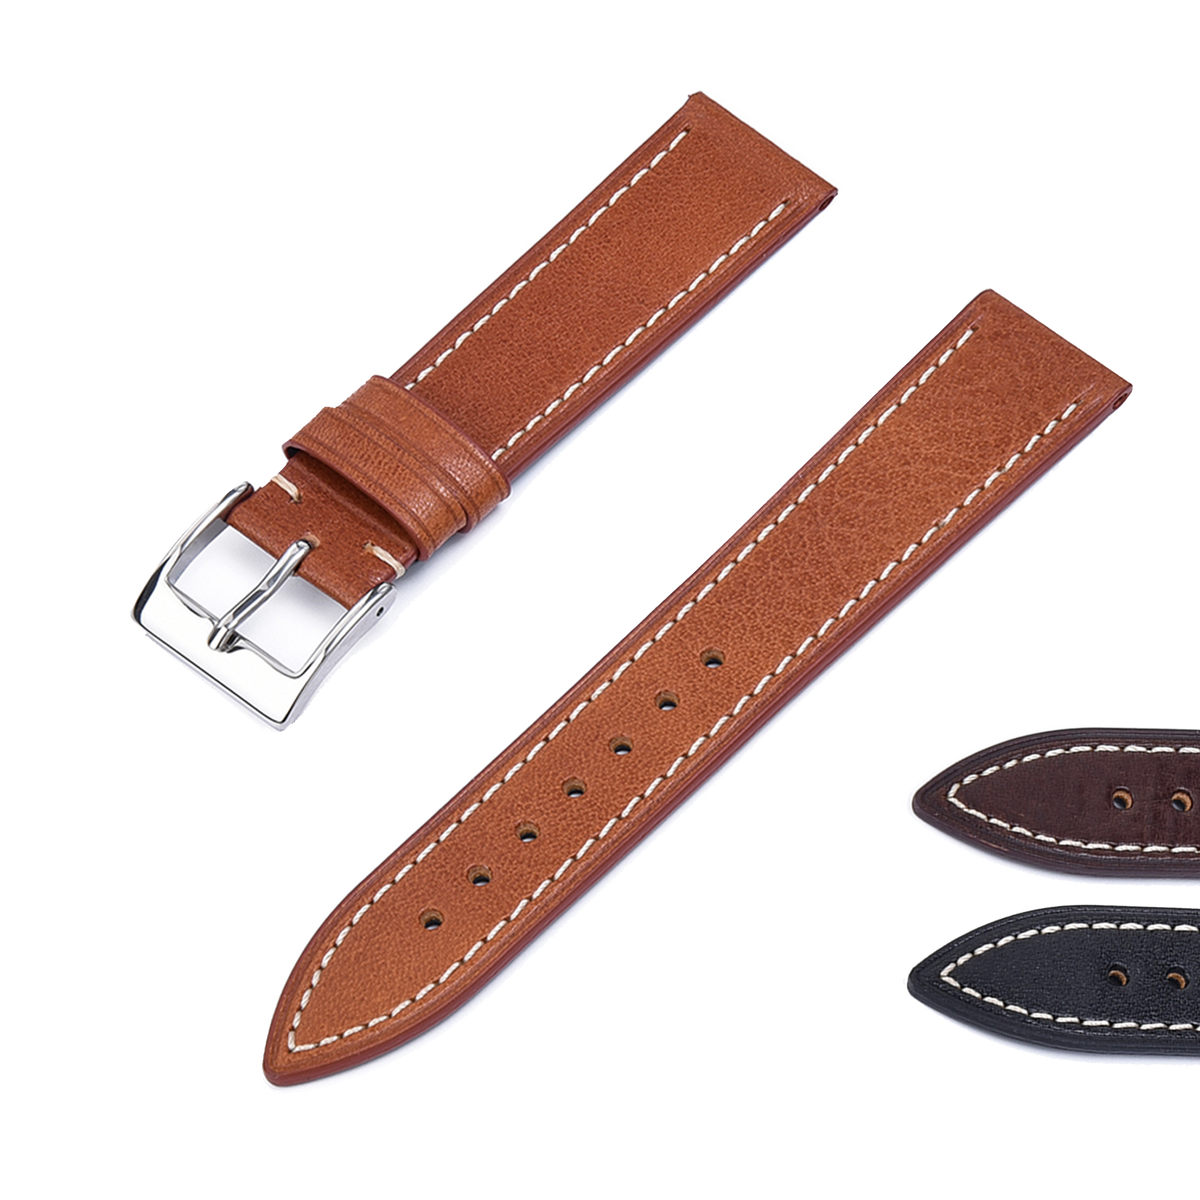 Halifax Watch Bands - Vegetable-Tanned Leather